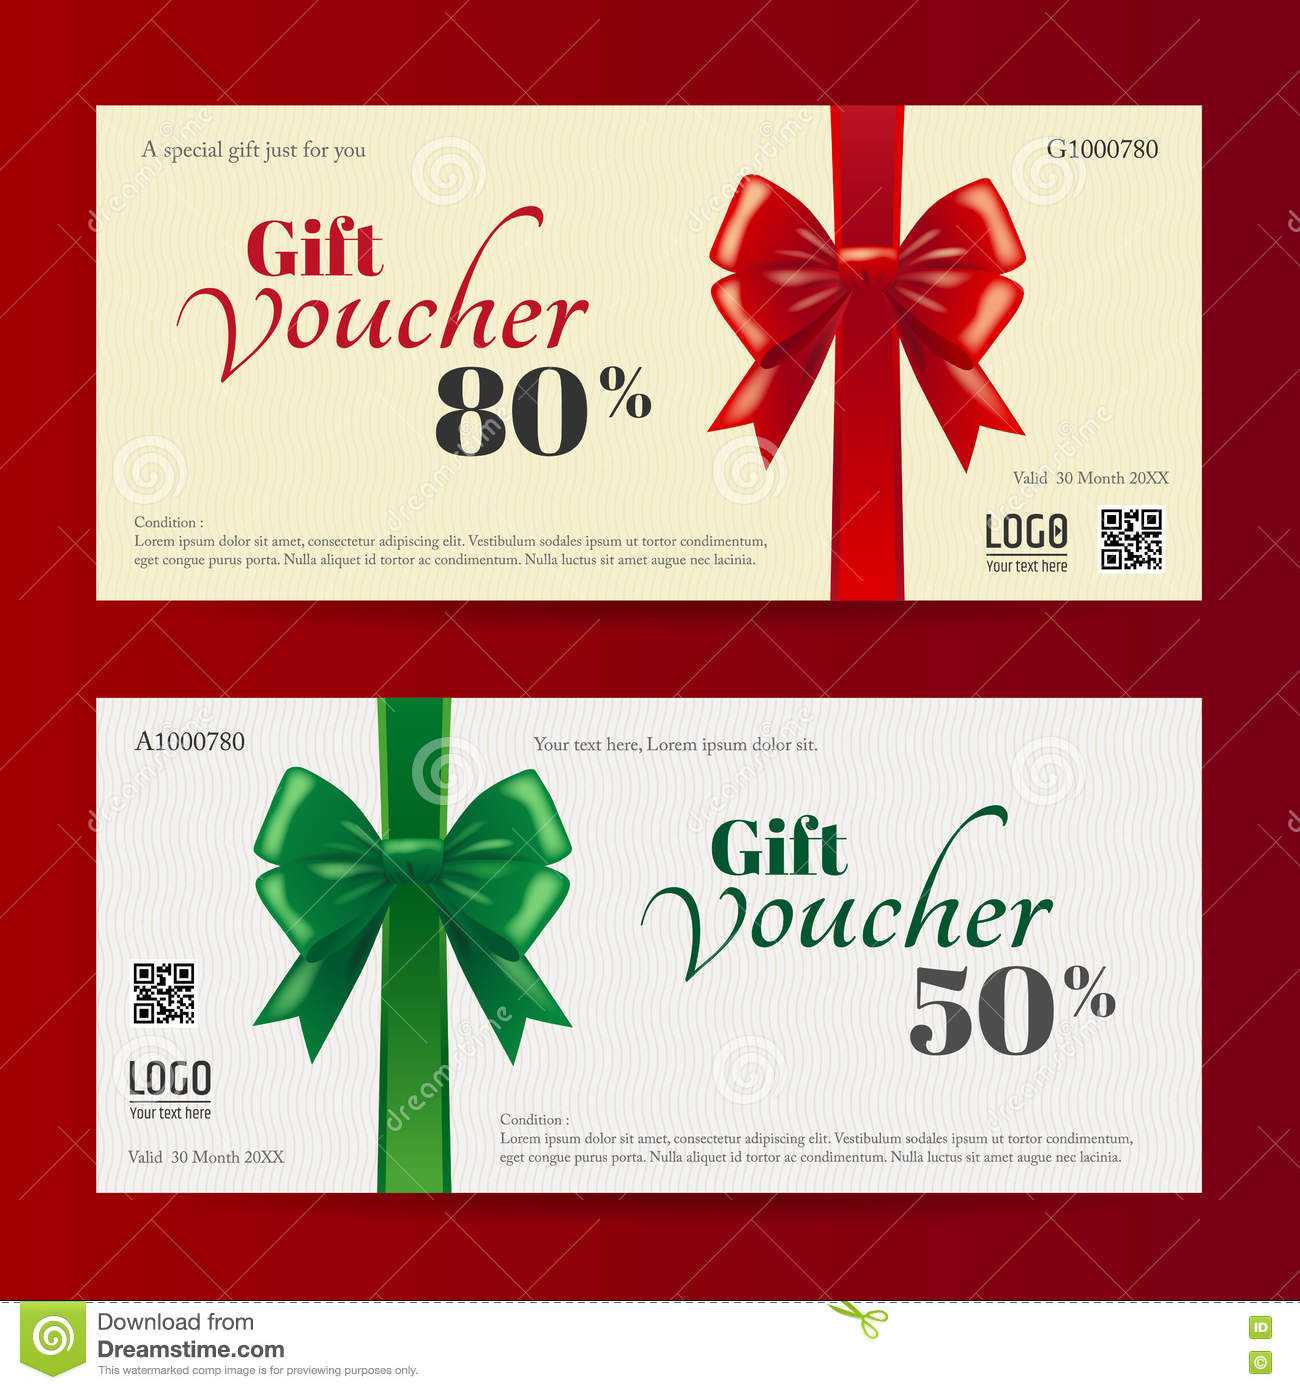 Elegant Christmas Gift Card Or Gift Voucher Template Stock Throughout Free Christmas Gift Certificate Templates